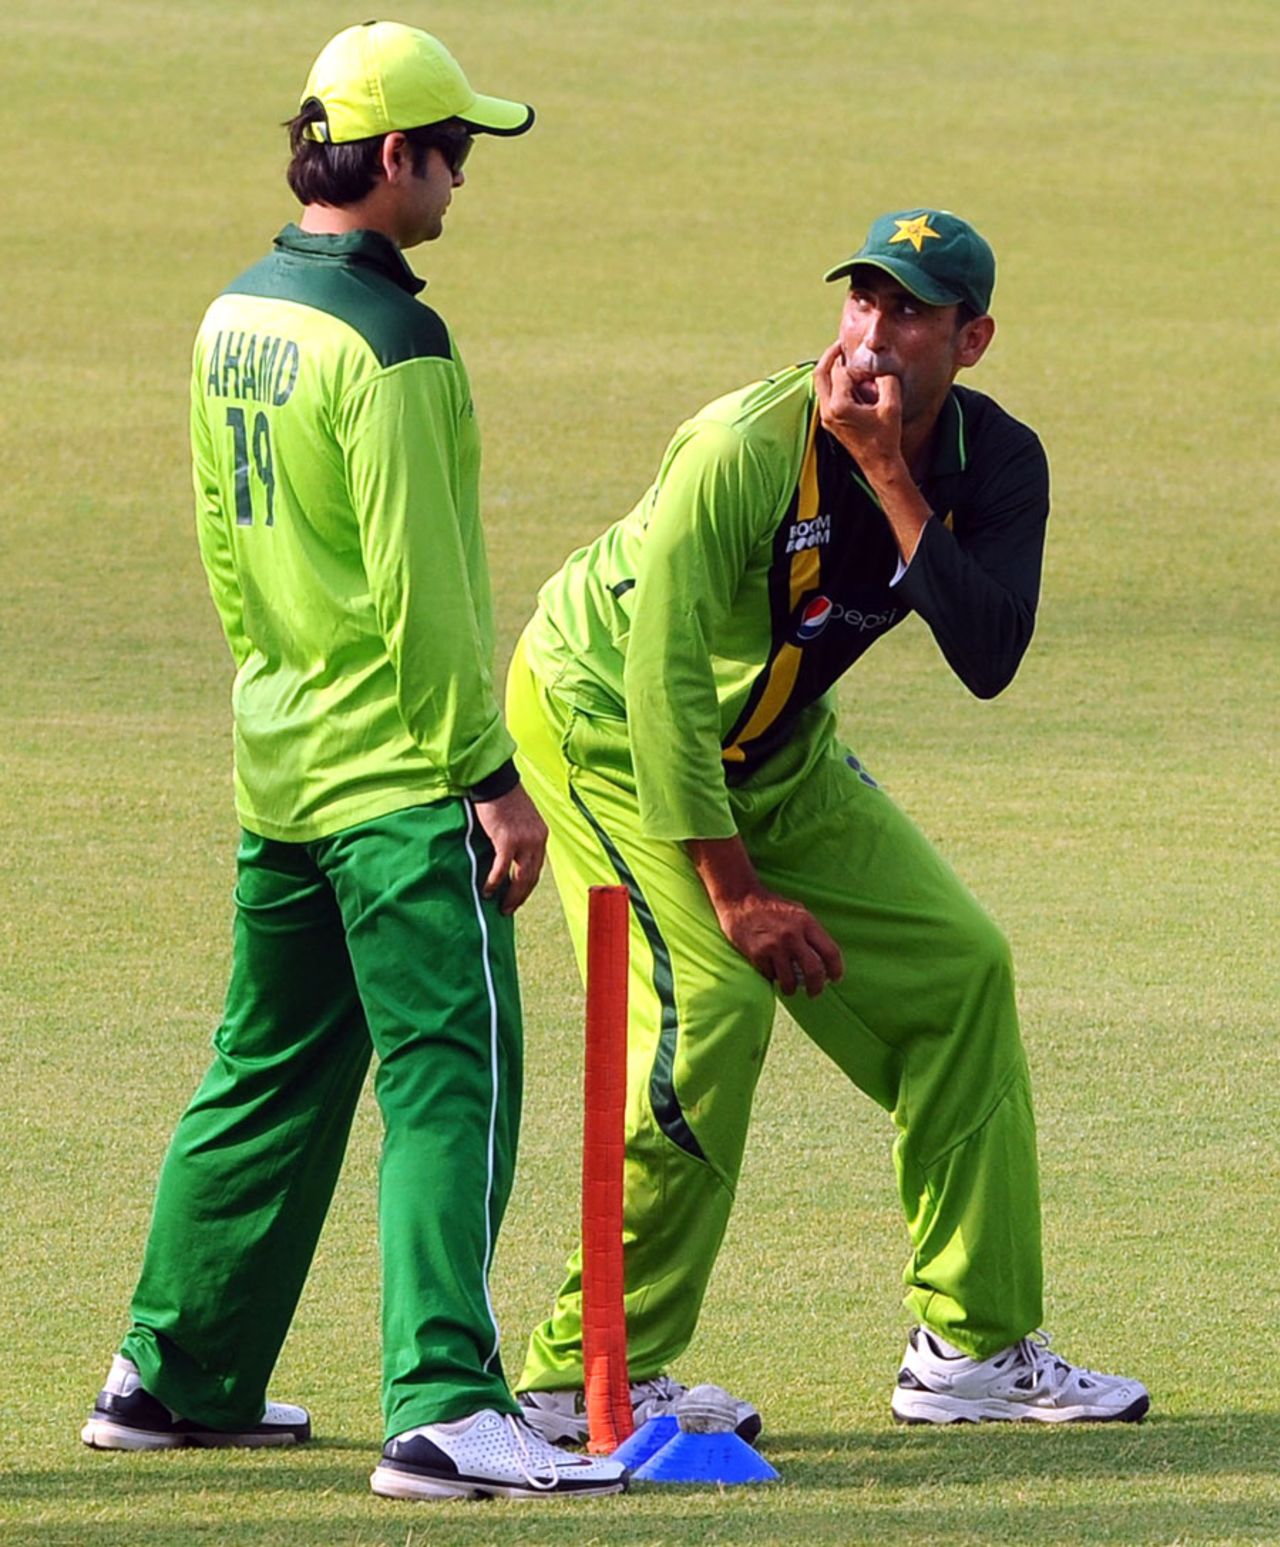 Younis Khan and Sarfraz Ahmed practise at a training session, Lahore, May 19, 2012